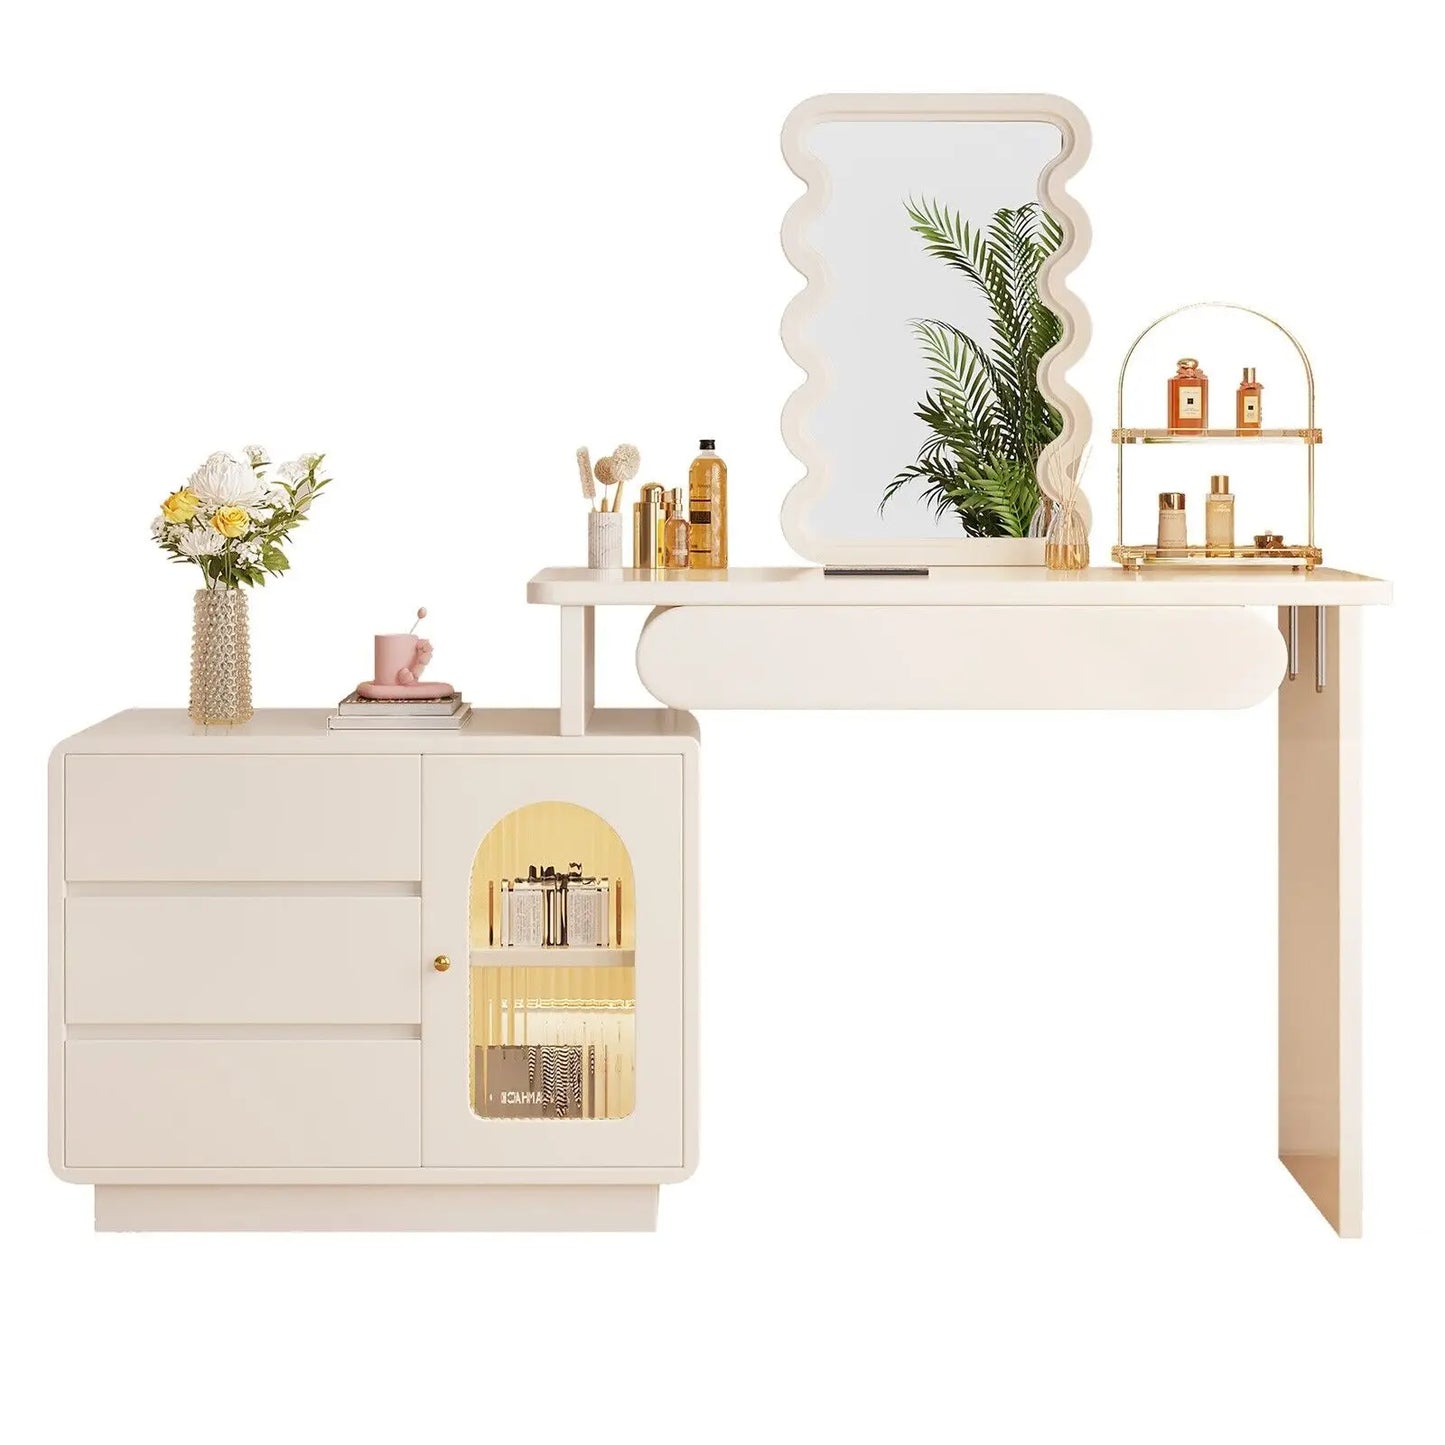 Vanity Table with Illuminated Mirror, Acrylic Chair, and Storage Features